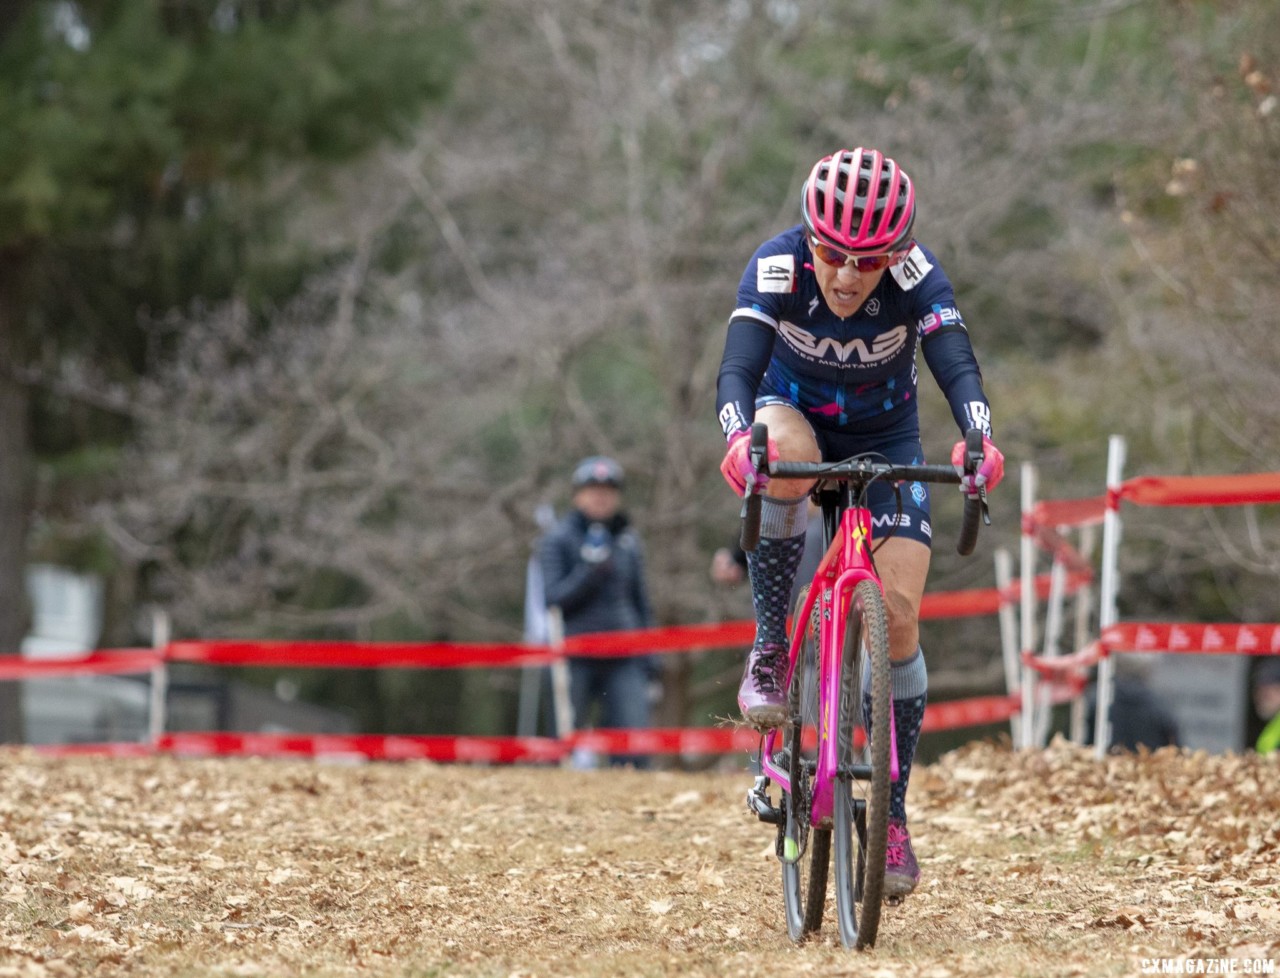 Susan McDonough made the wide-angle podium on Thursday. Masters Women 55-59. 2018 Cyclocross National Championships, Louisville, KY. © A. Yee / Cyclocross Magazine